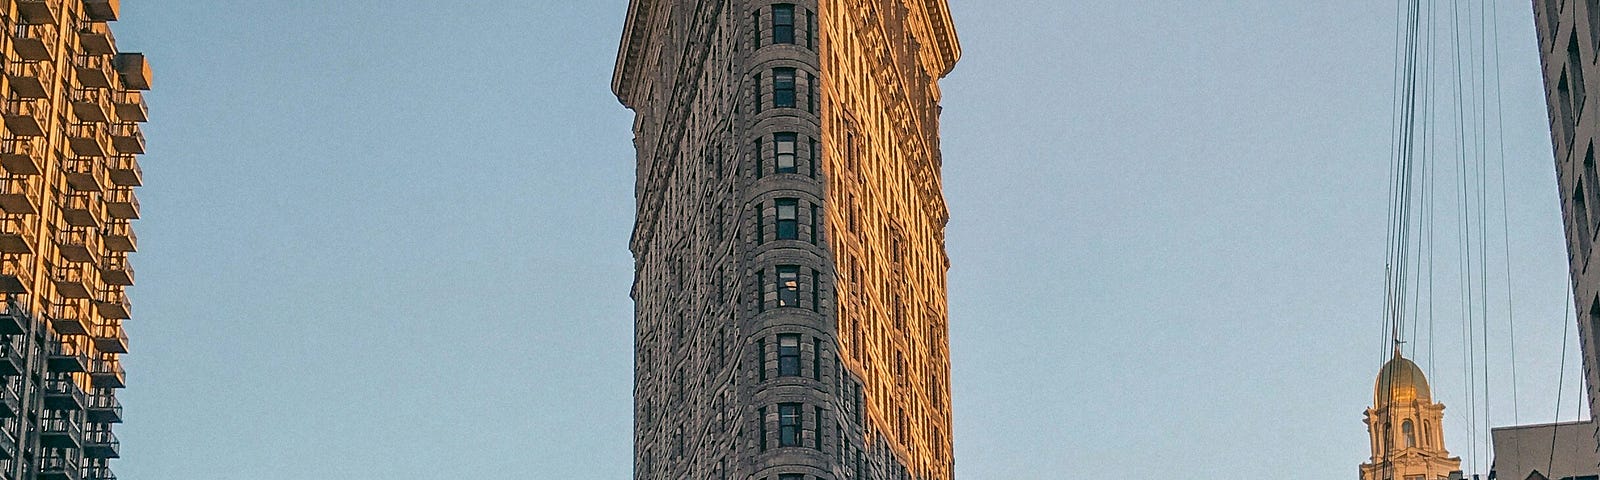 Flat Iron building in New York City. A photo from Unsplash photos.